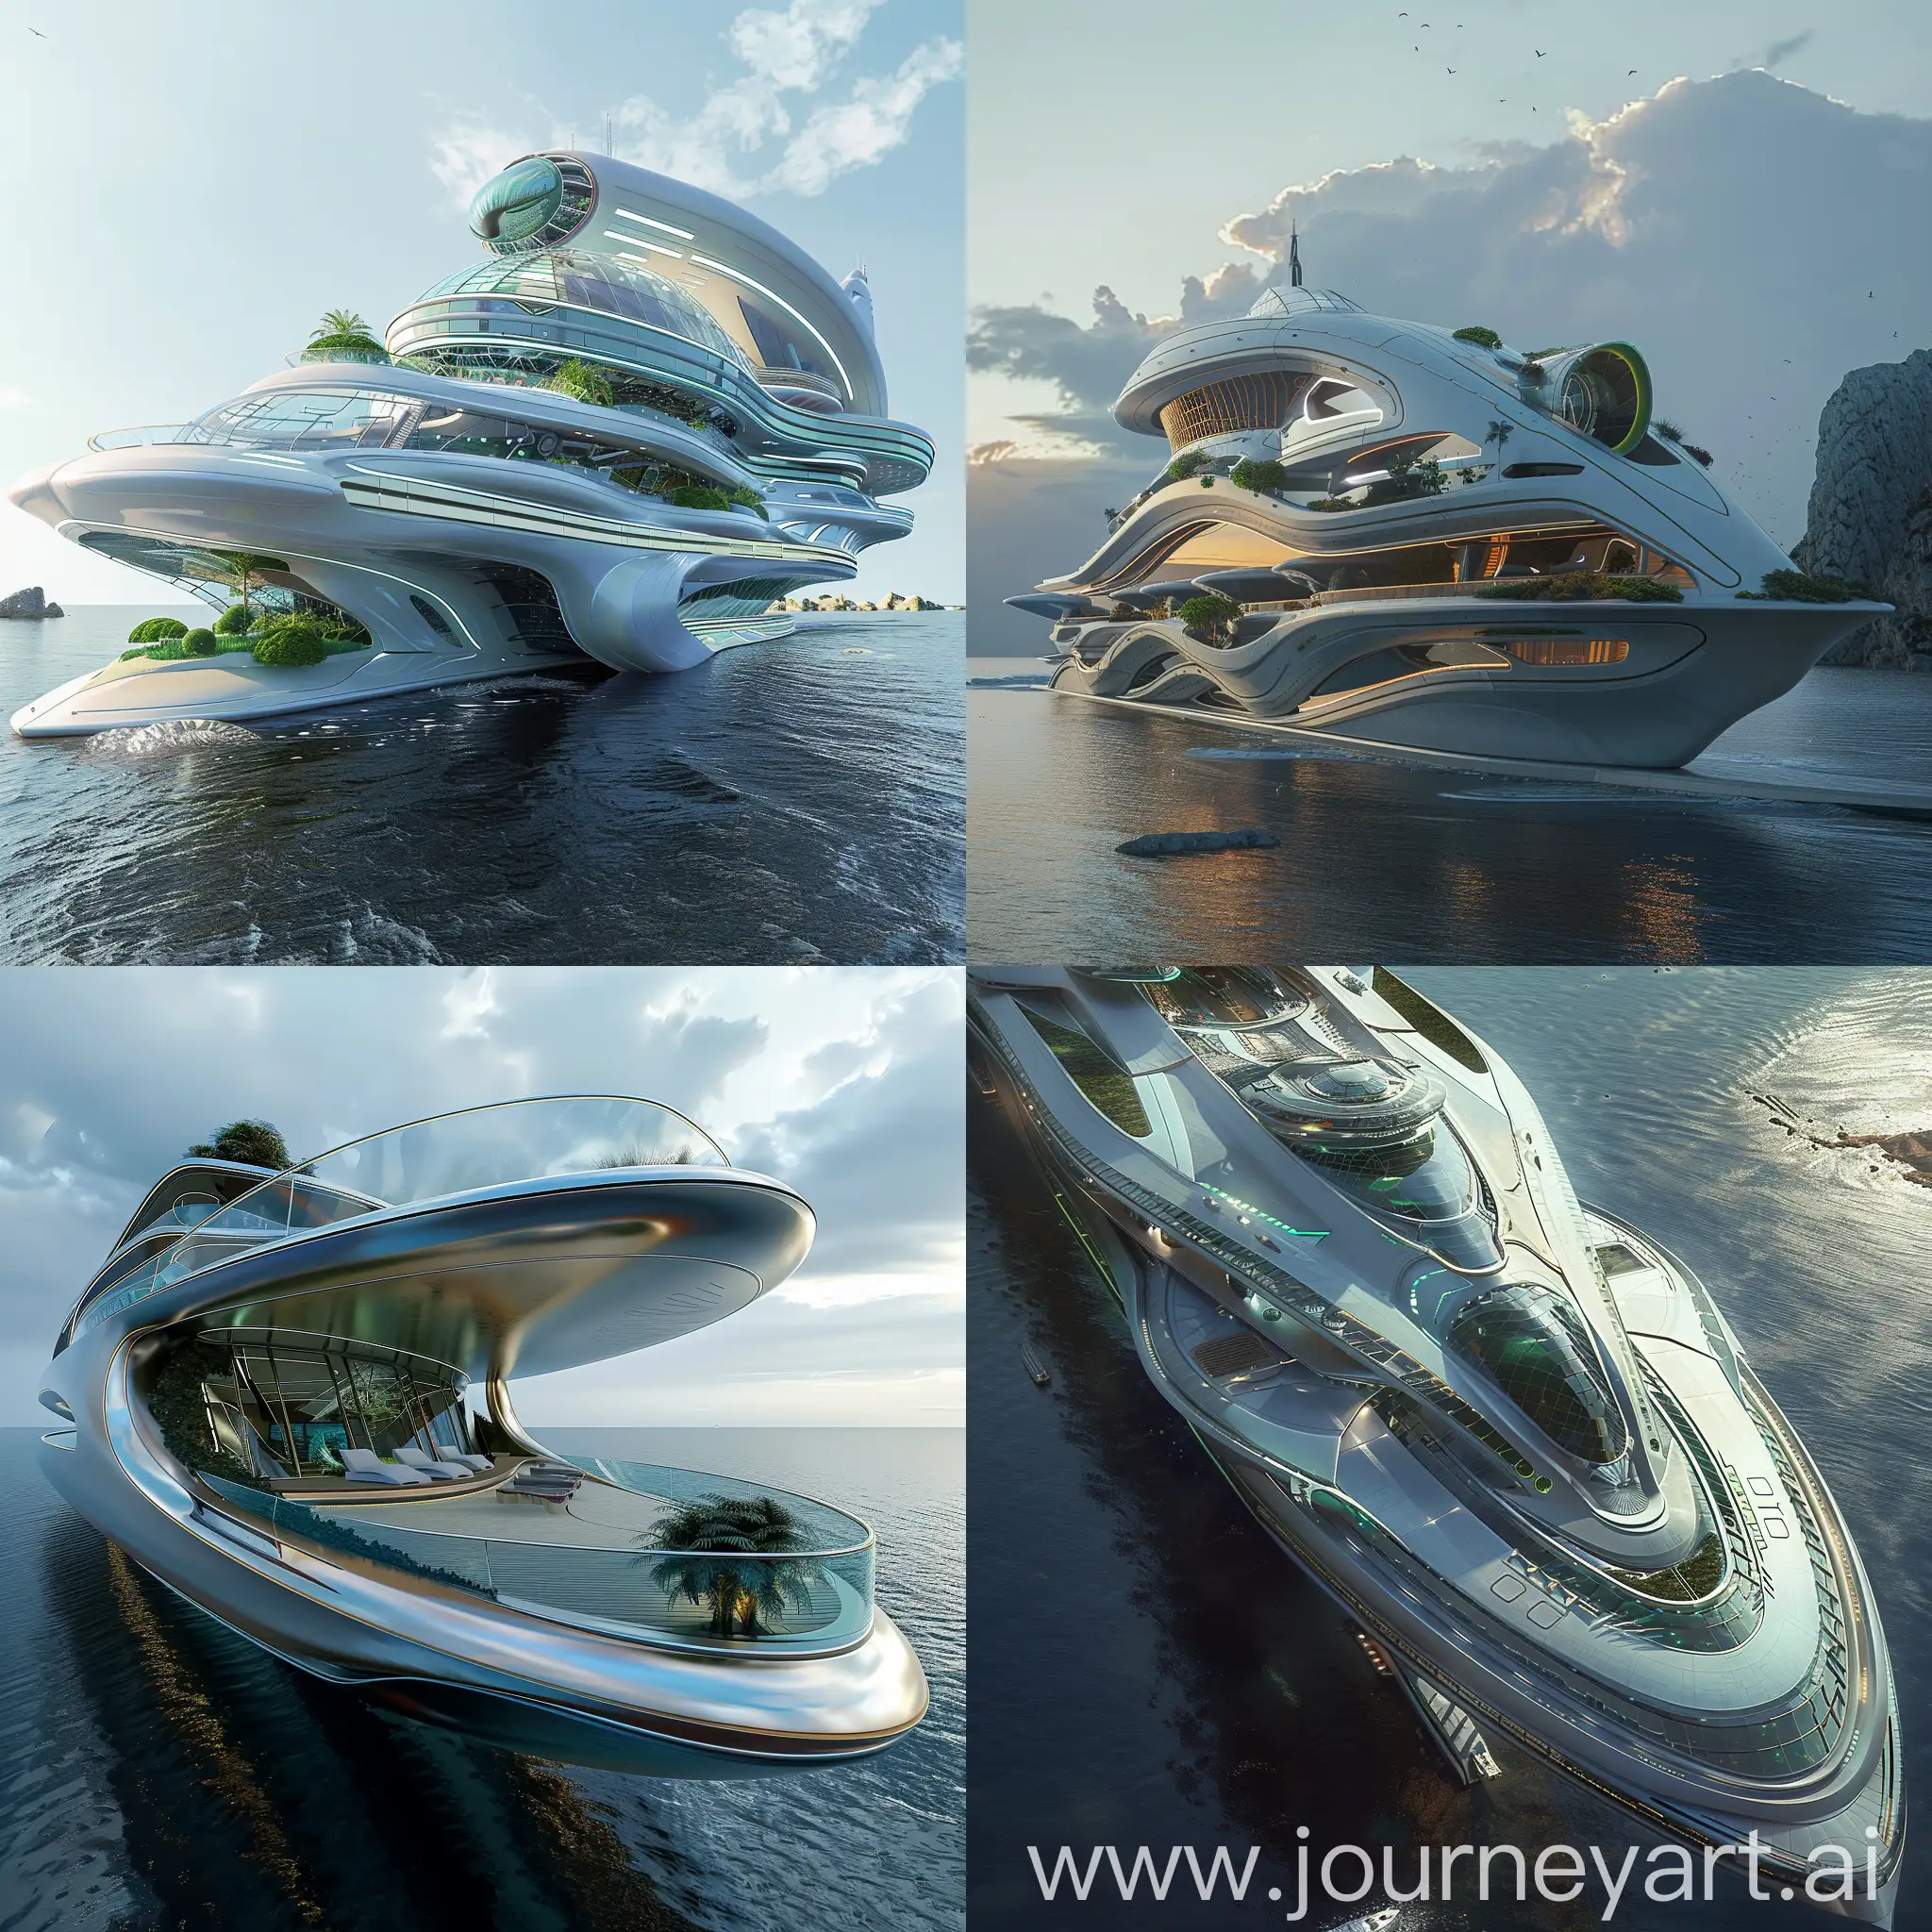 Futuristic-SciFi-Cruise-Ship-with-Advanced-Technology-and-Luxurious-Amenities